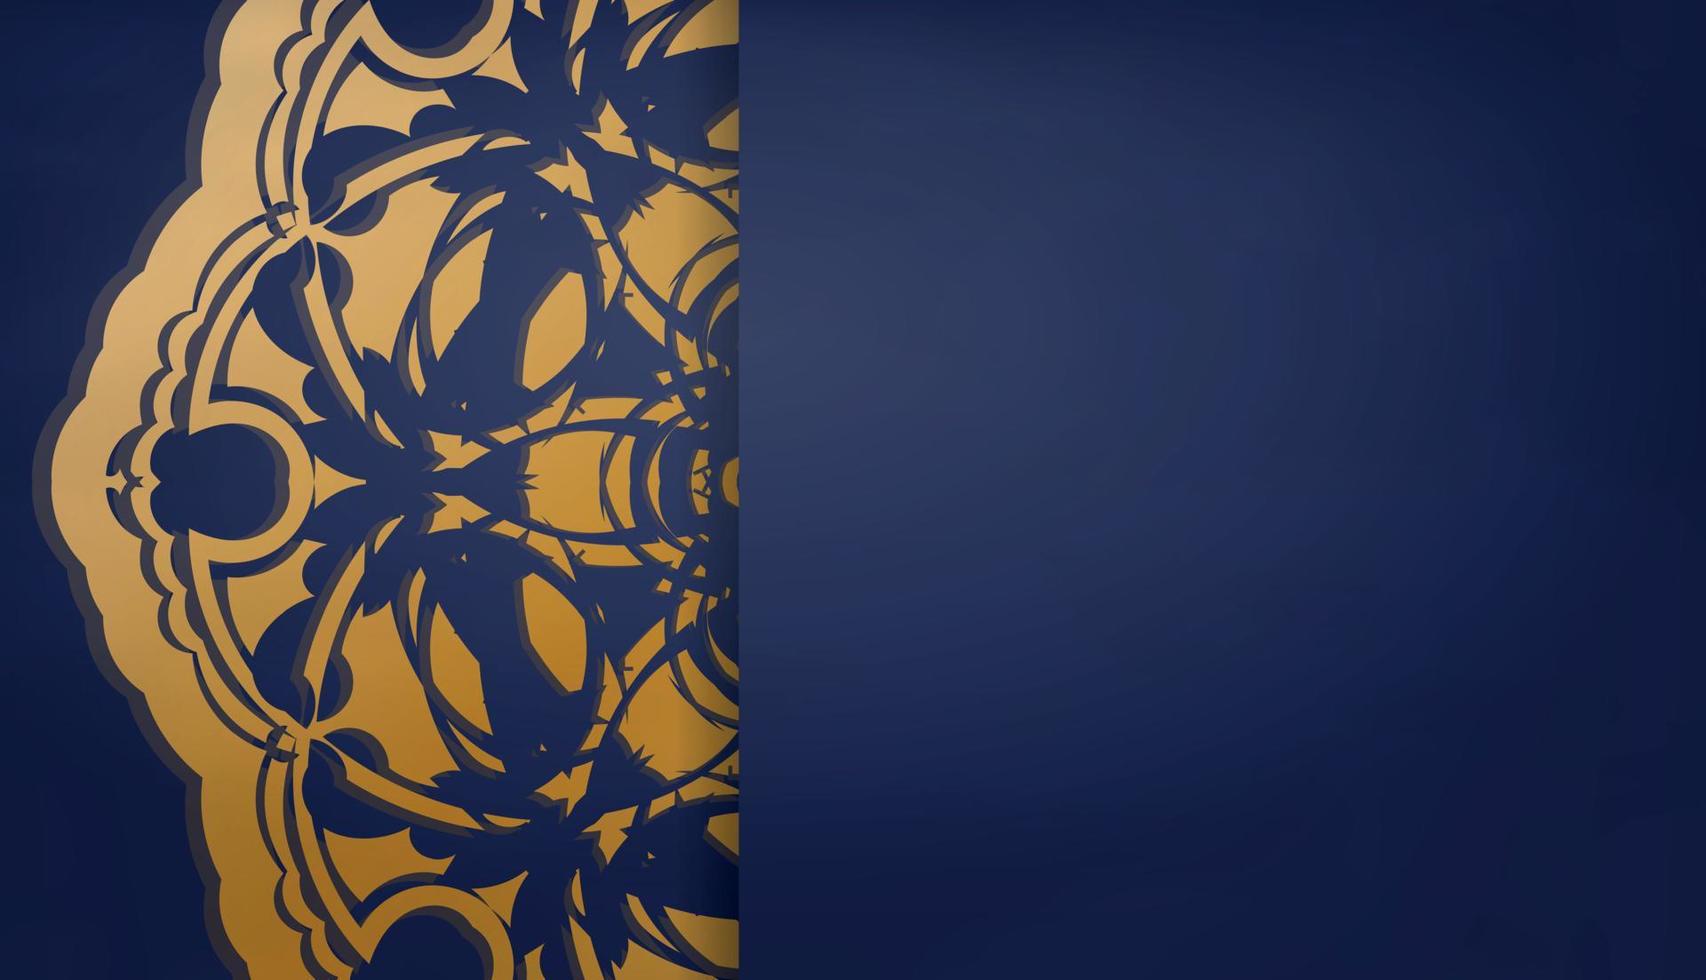 Dark blue banner with a mandala with gold ornaments and a place for logo or text vector